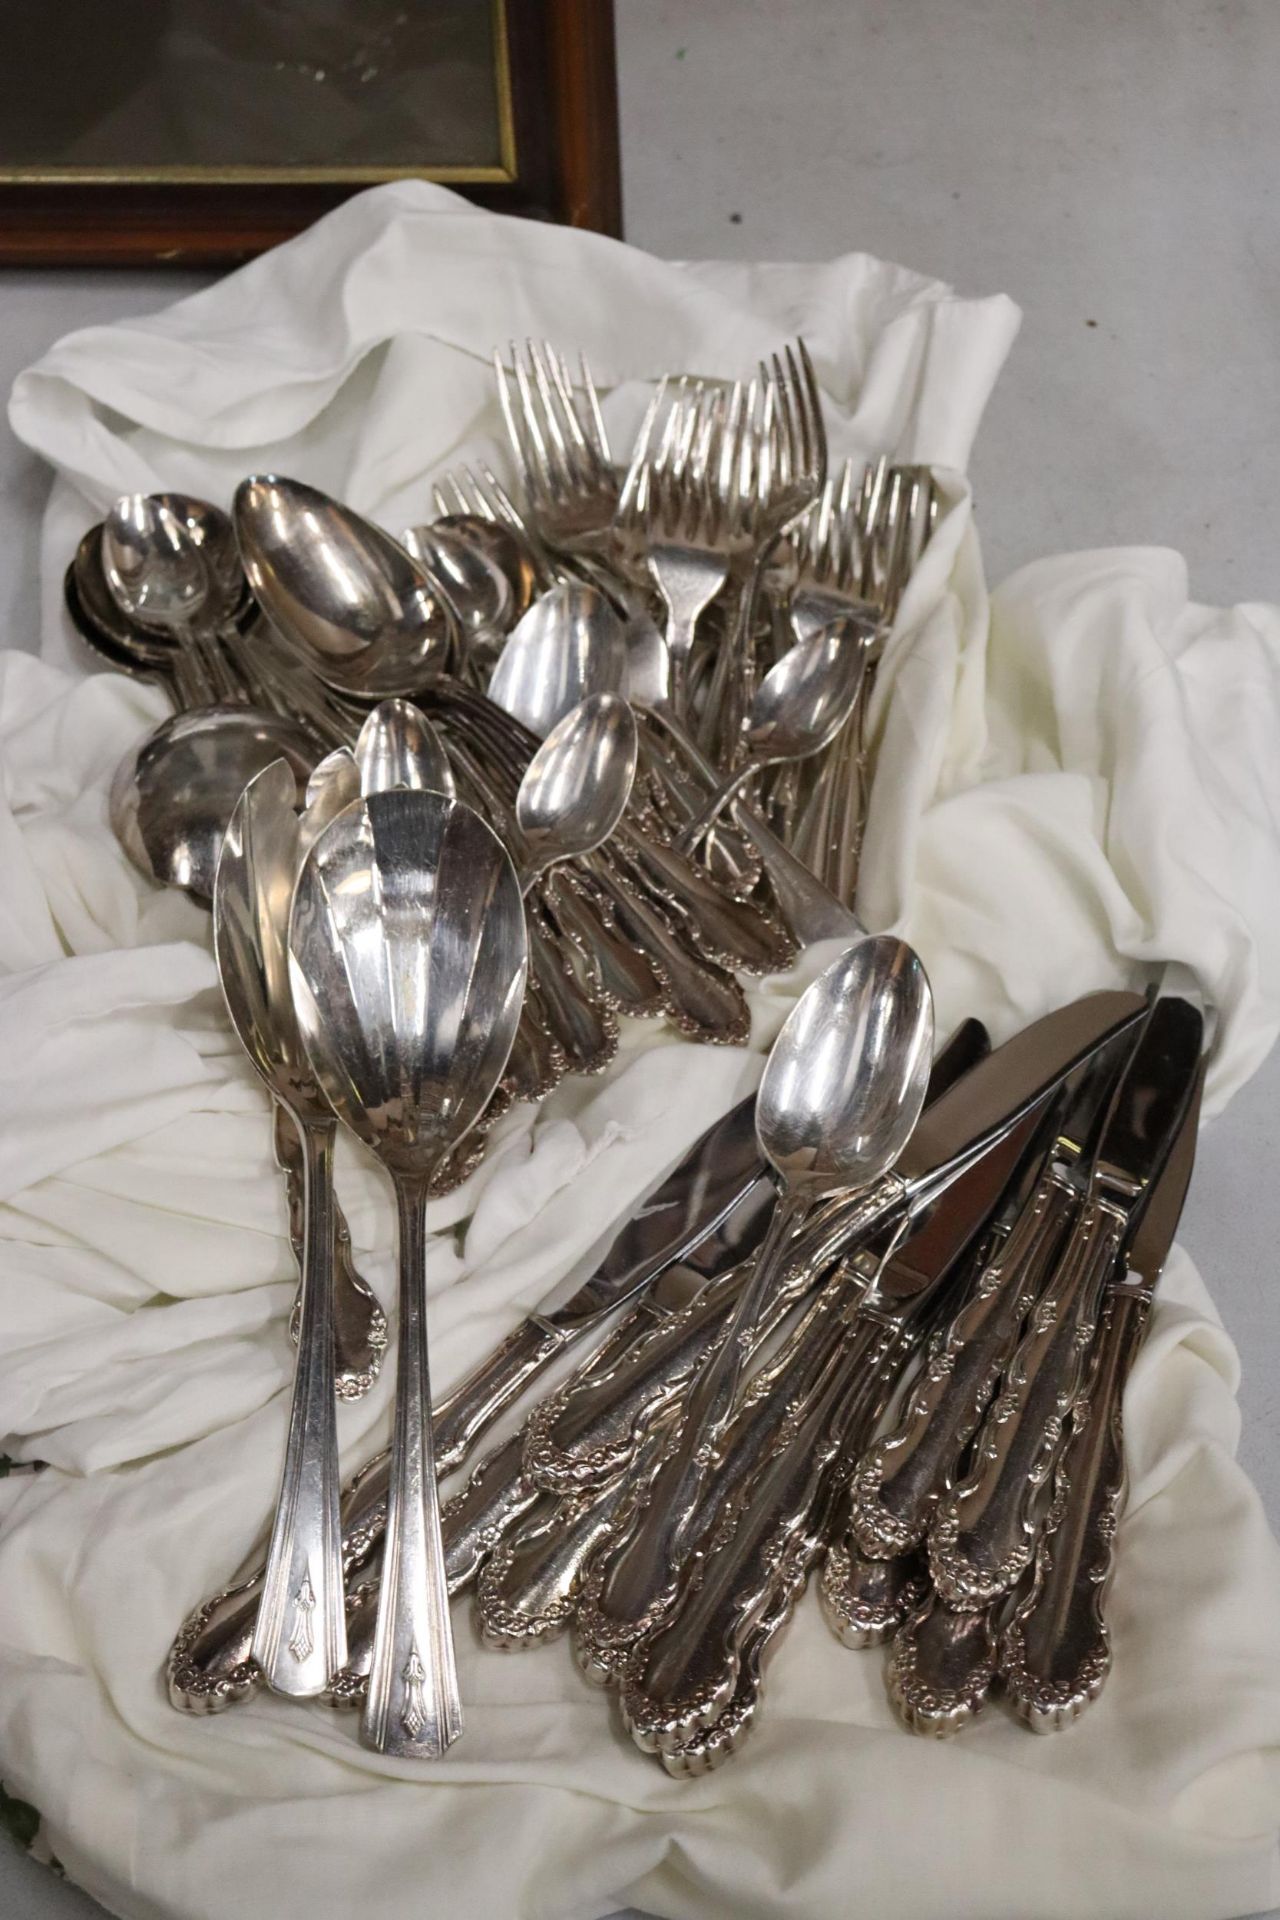 A QUANTITY OF FLATWARE, KNIVES, FORKS AND SPOONS